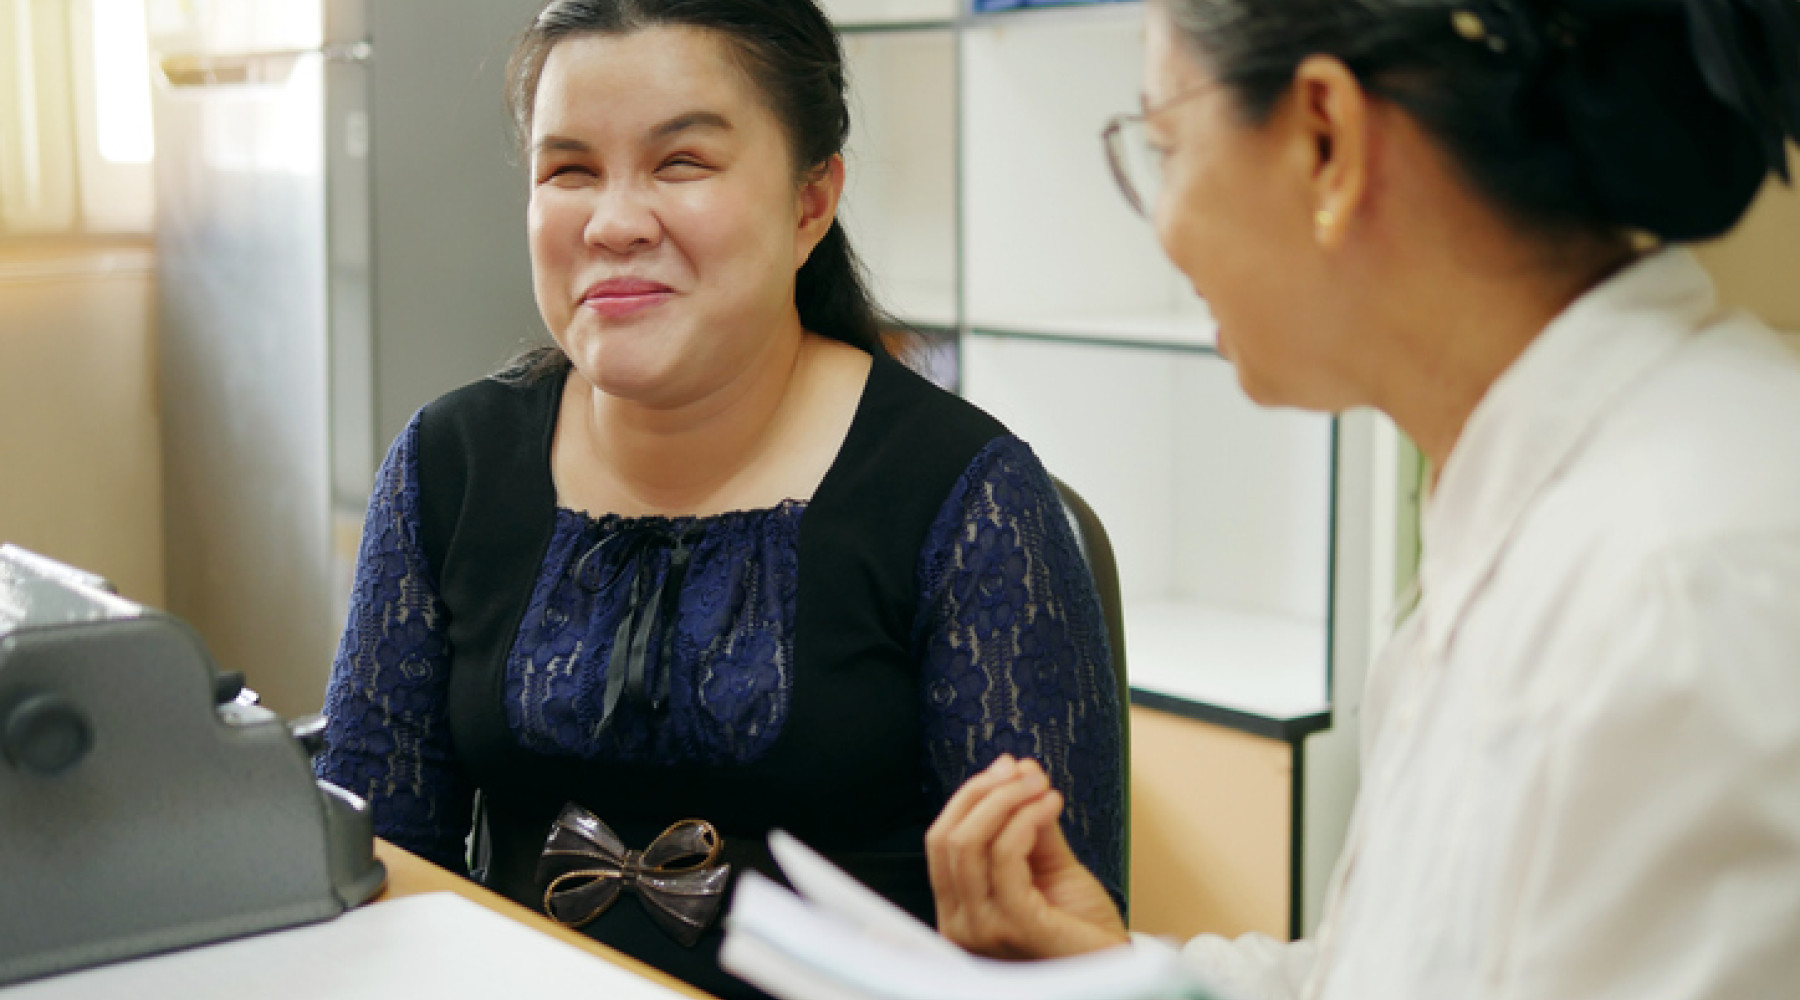 Blind asian woman participating in work as part of the NDIS checklist